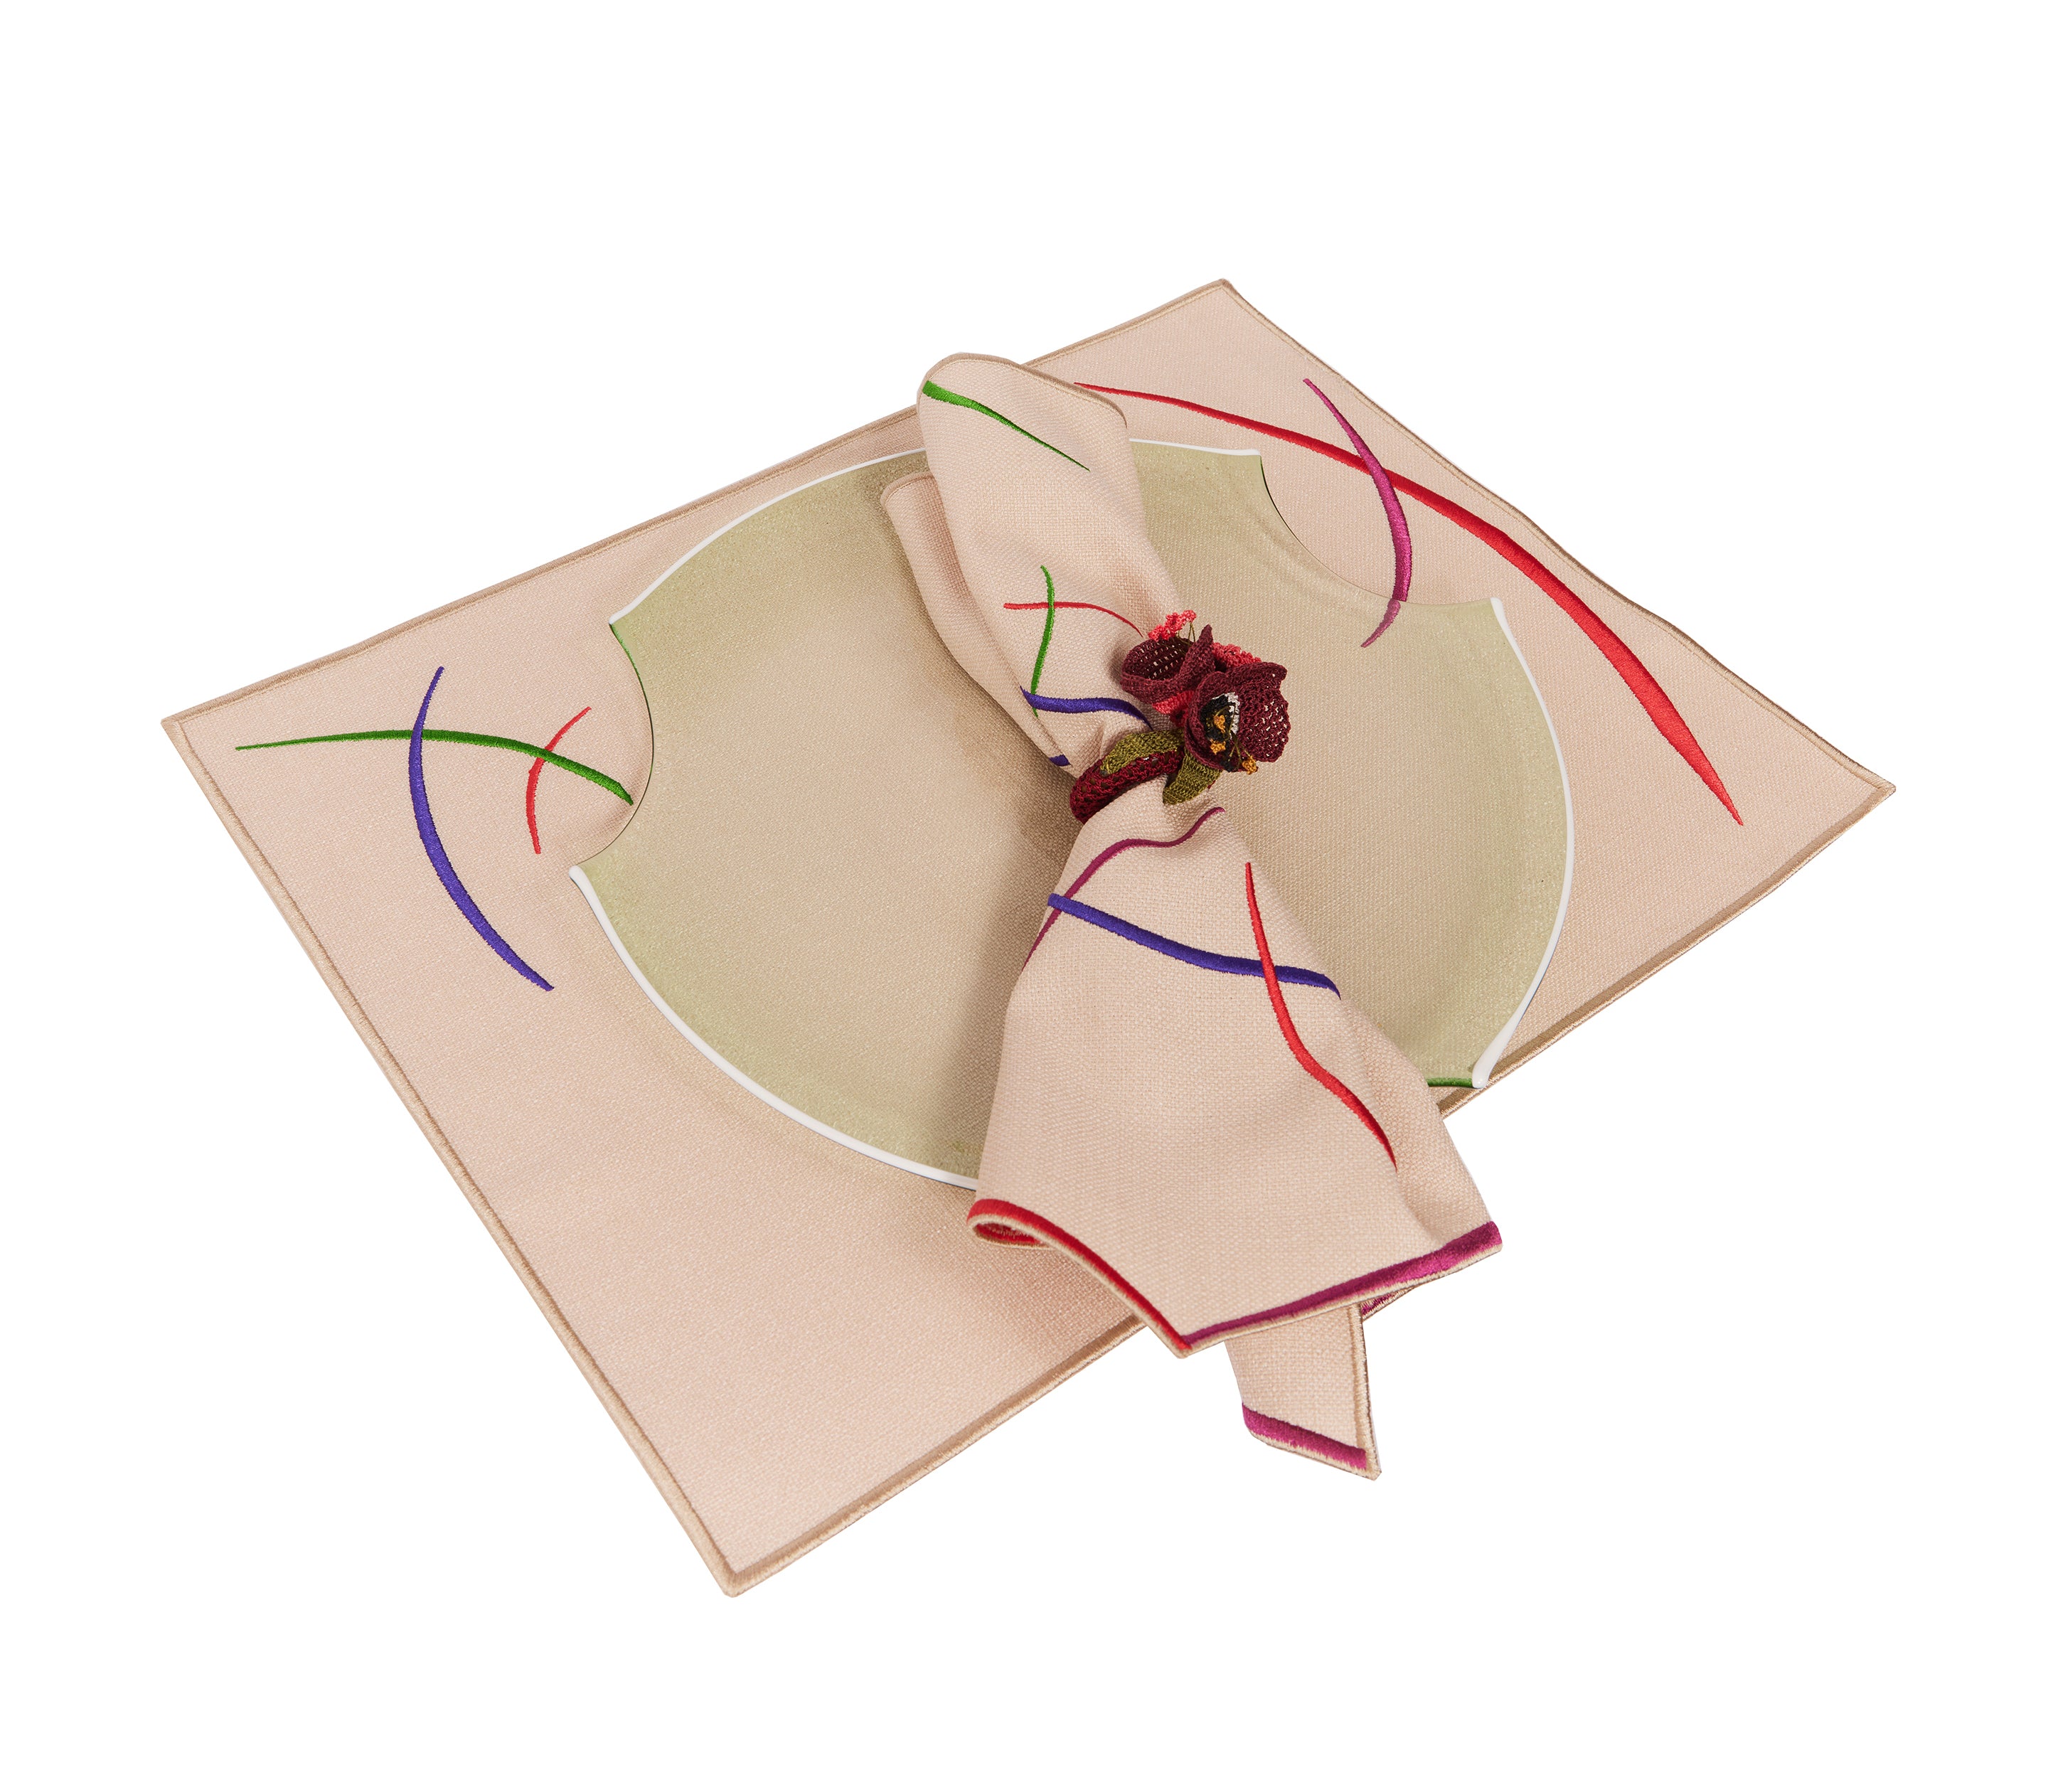 Placemat and Napkin Set of 2